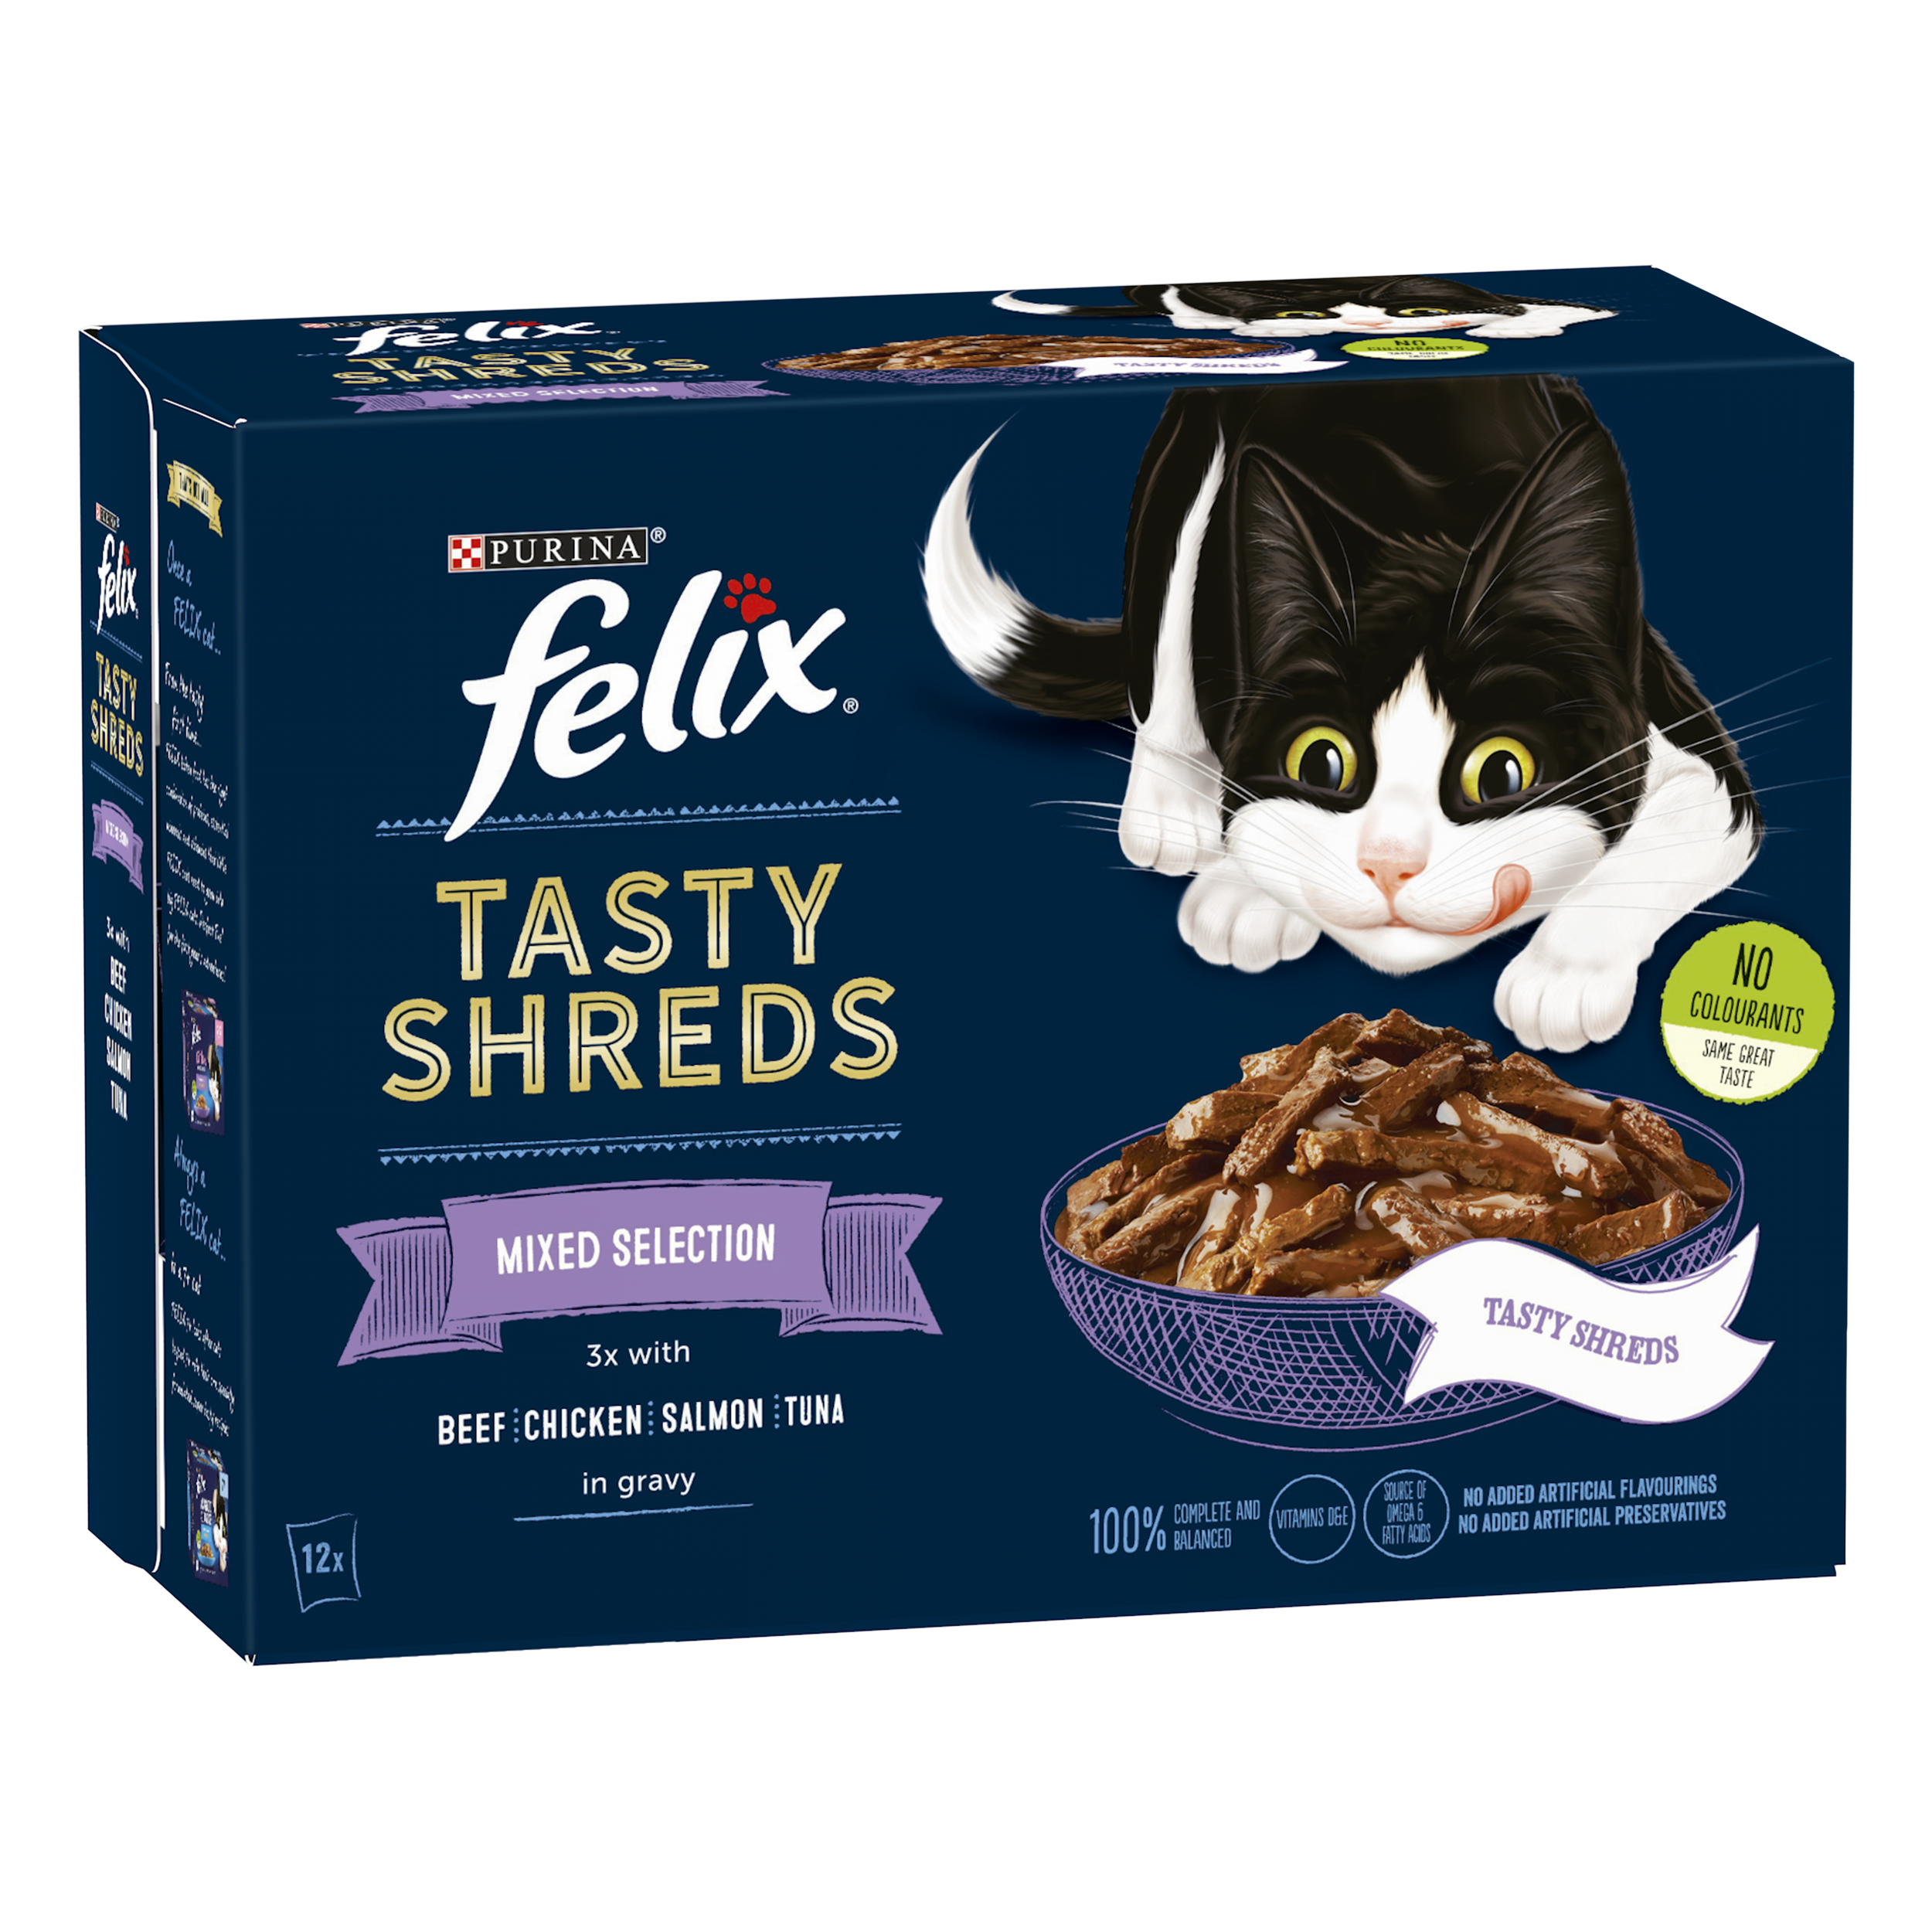 Purina Felix® Tasty Shreds Multipack Mixed Selection 80g, Pack of 12